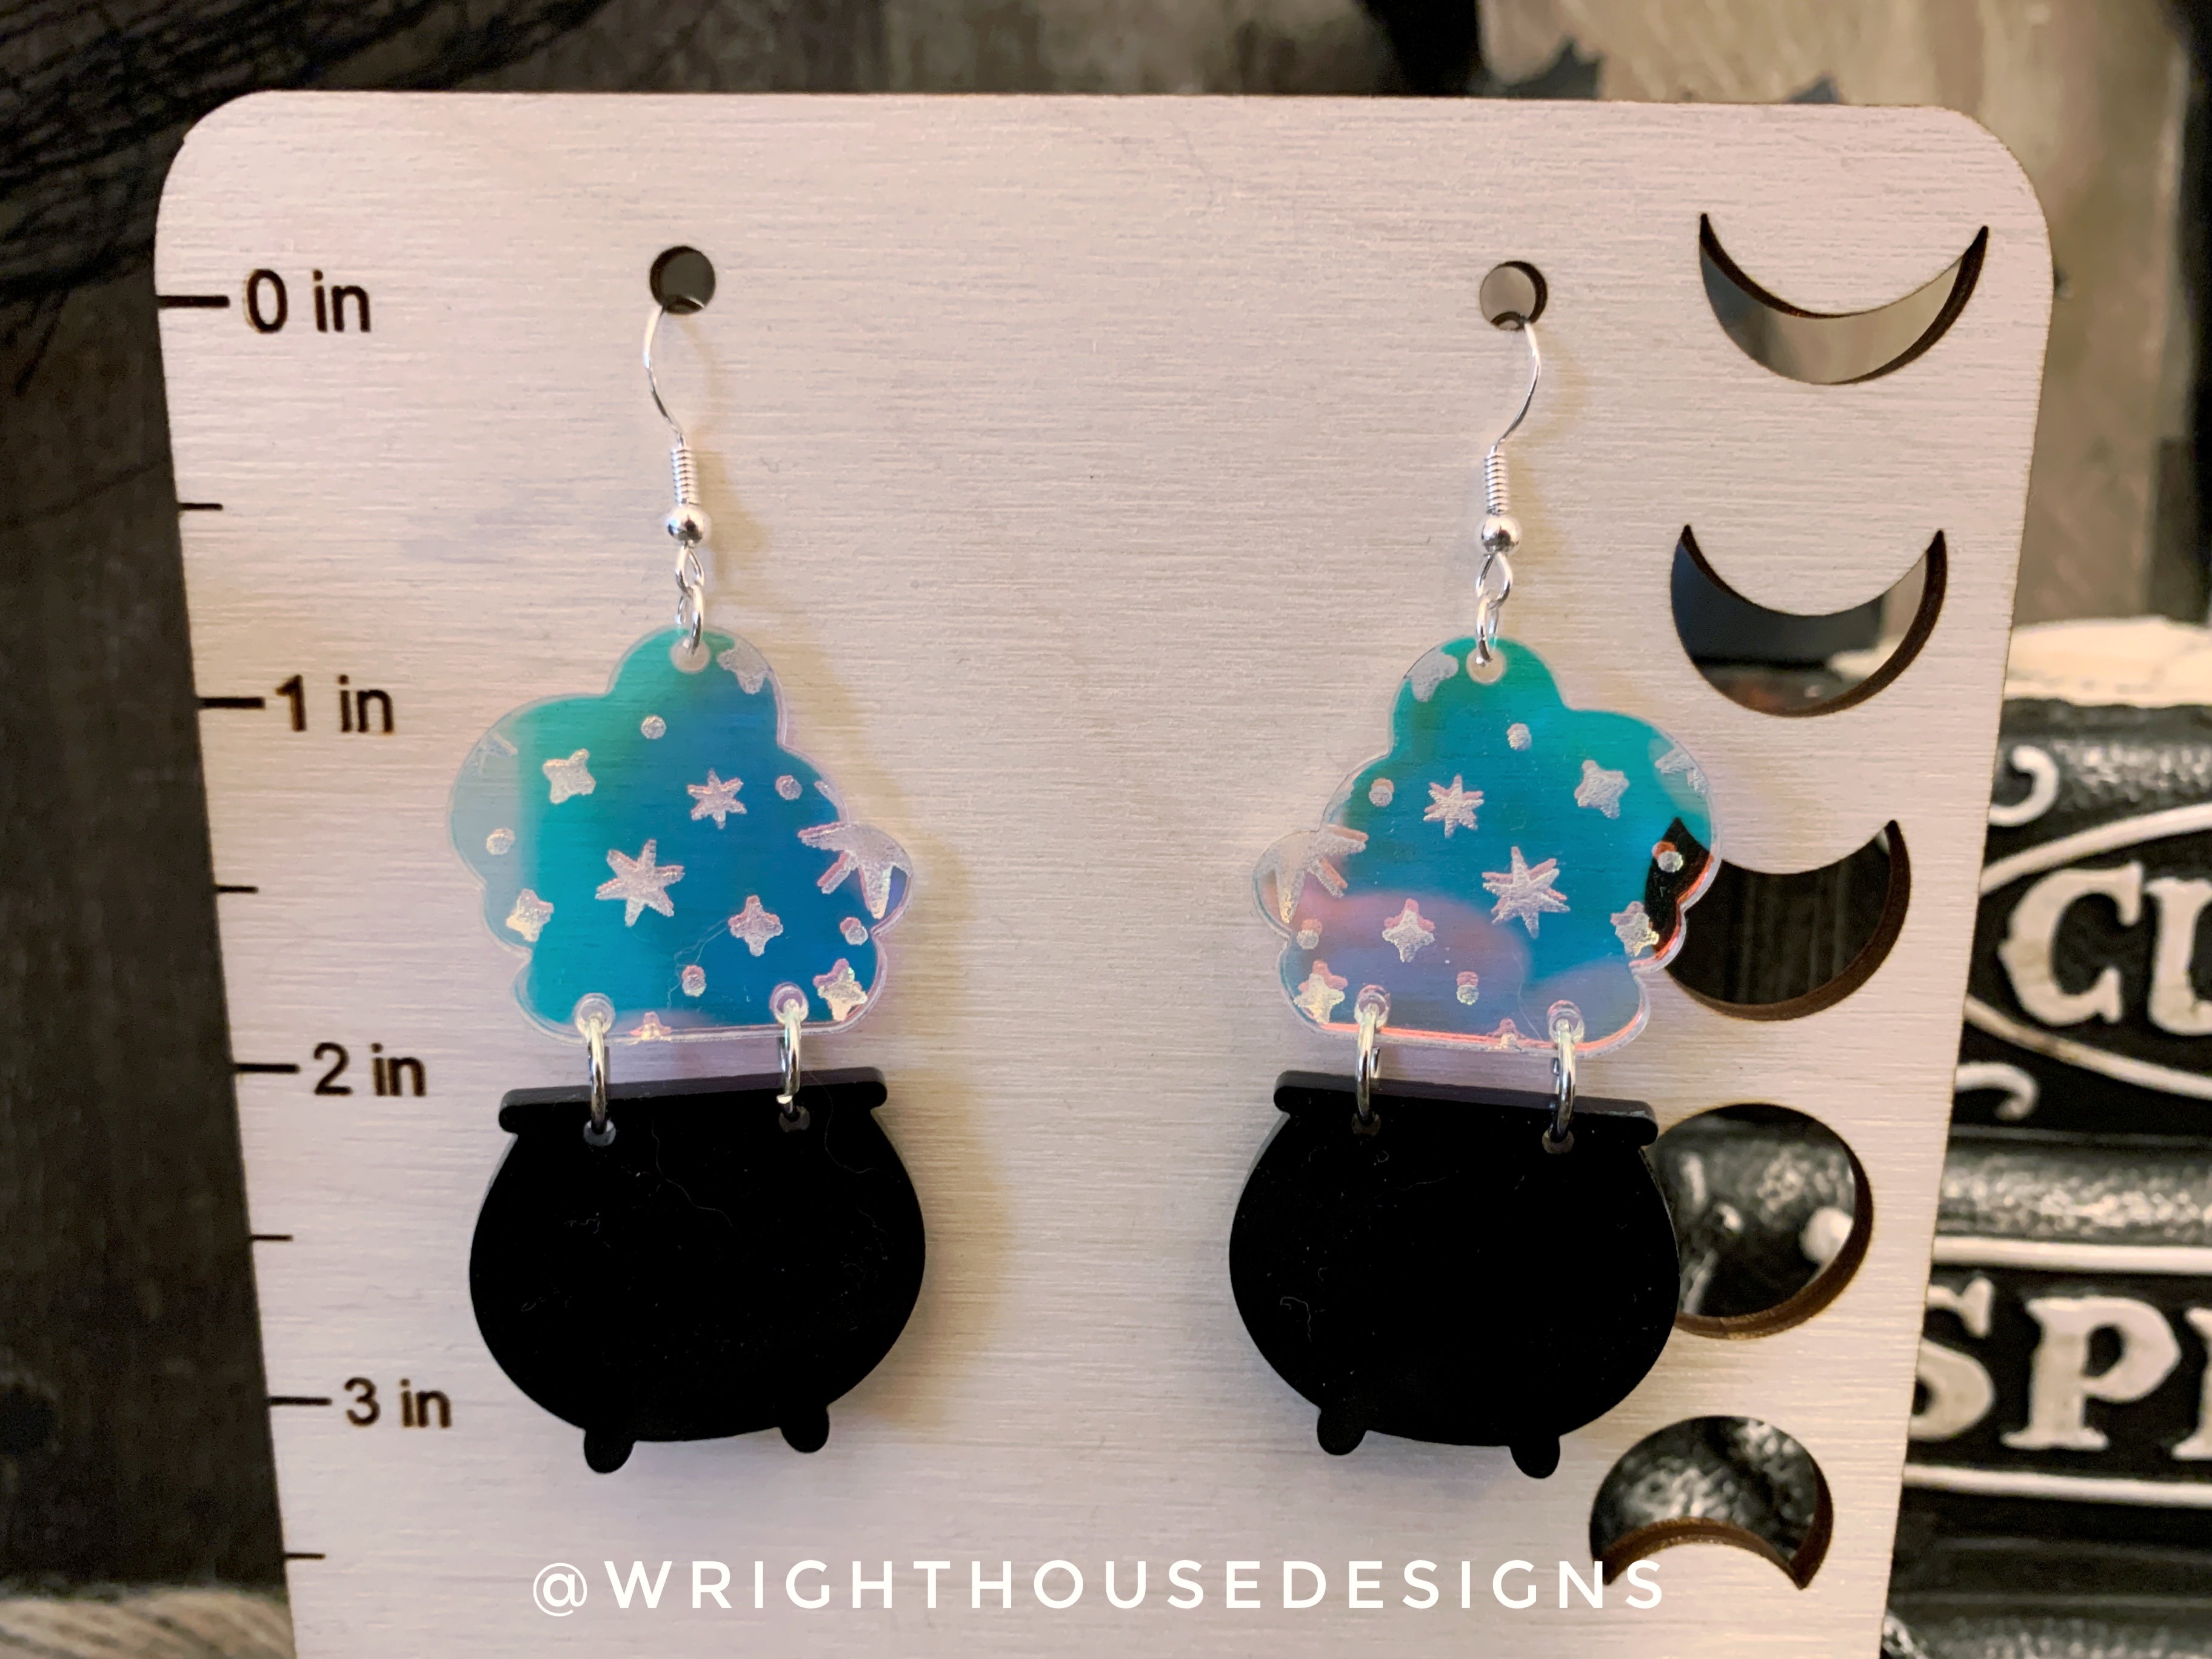 Bubbling Cauldron One - Witchy Halloween Earrings - Engraved Iridescent Acrylic Handmade Jewelry